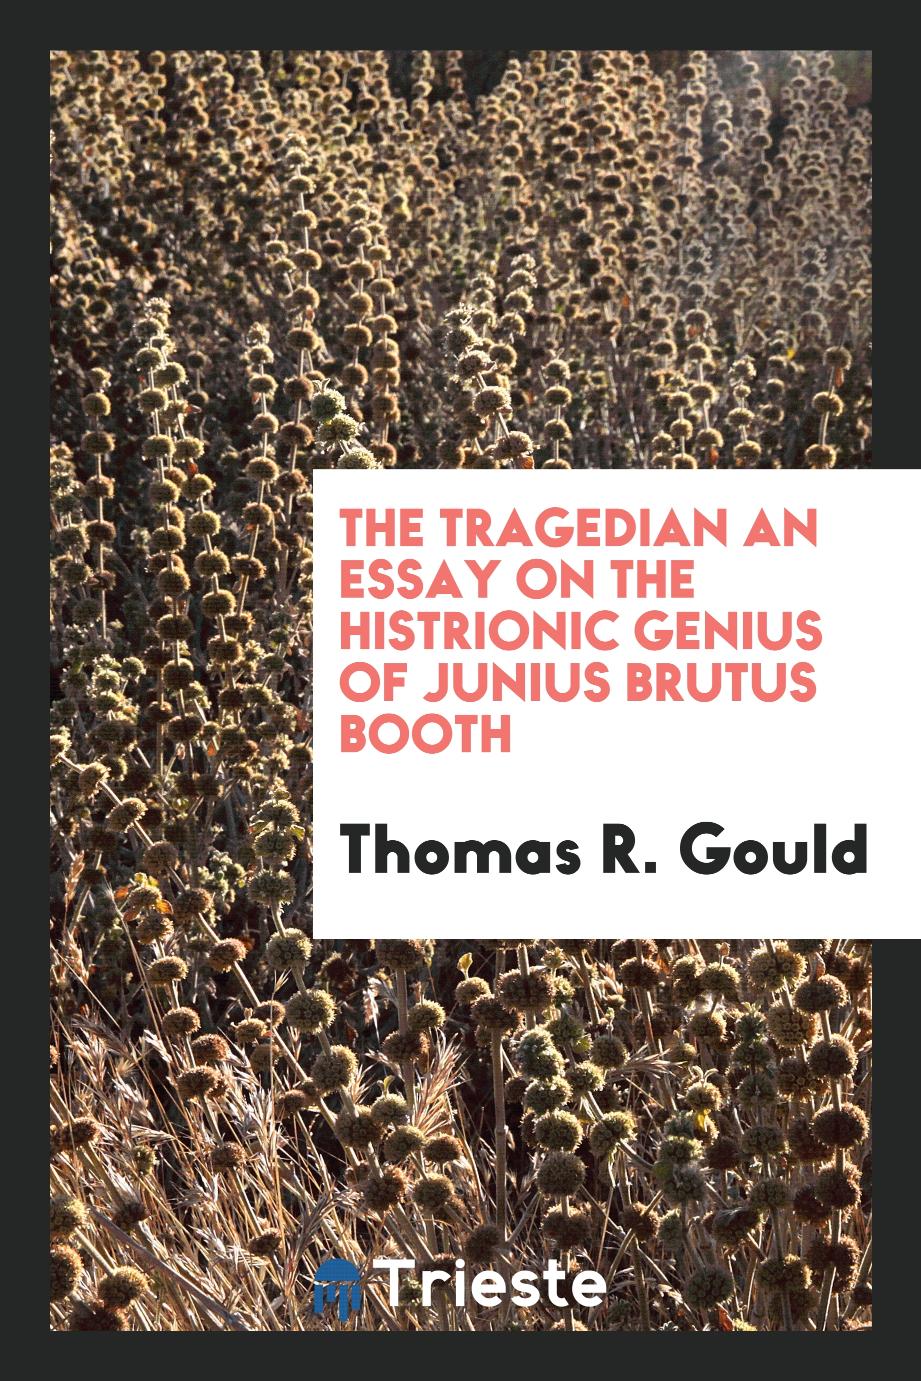 The tragedian an essay on the histrionic genius of Junius Brutus Booth